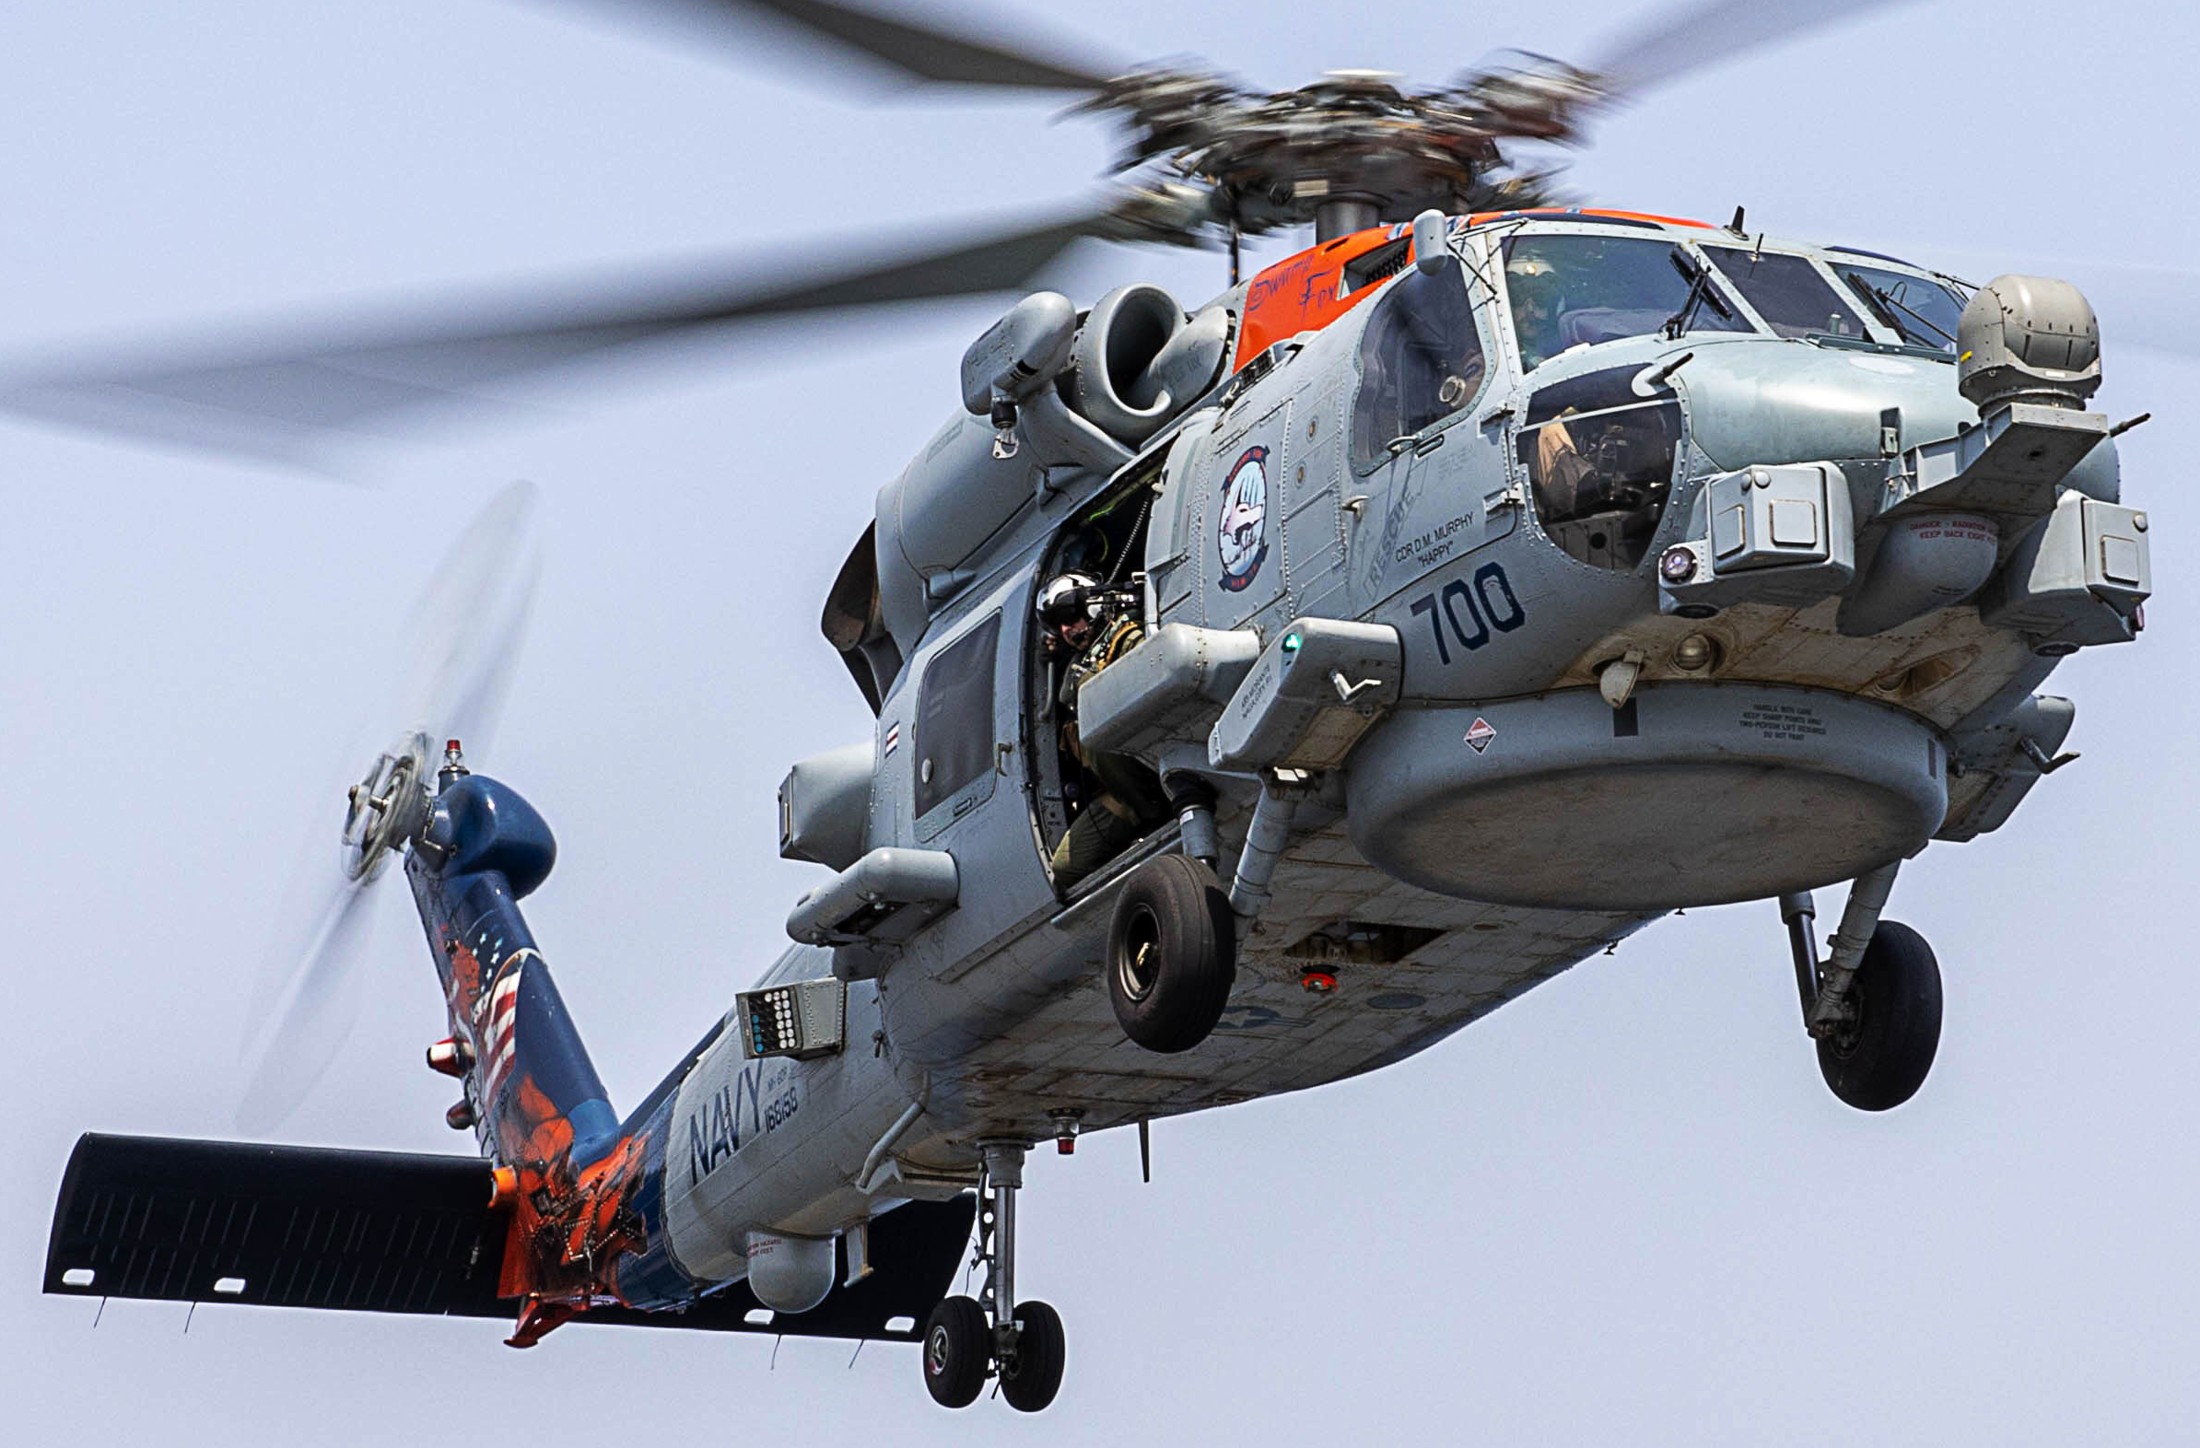 hsm-74 swamp foxes helicopter maritime strike squadron mh-60r seahawk lhd-5 uss bataan 102